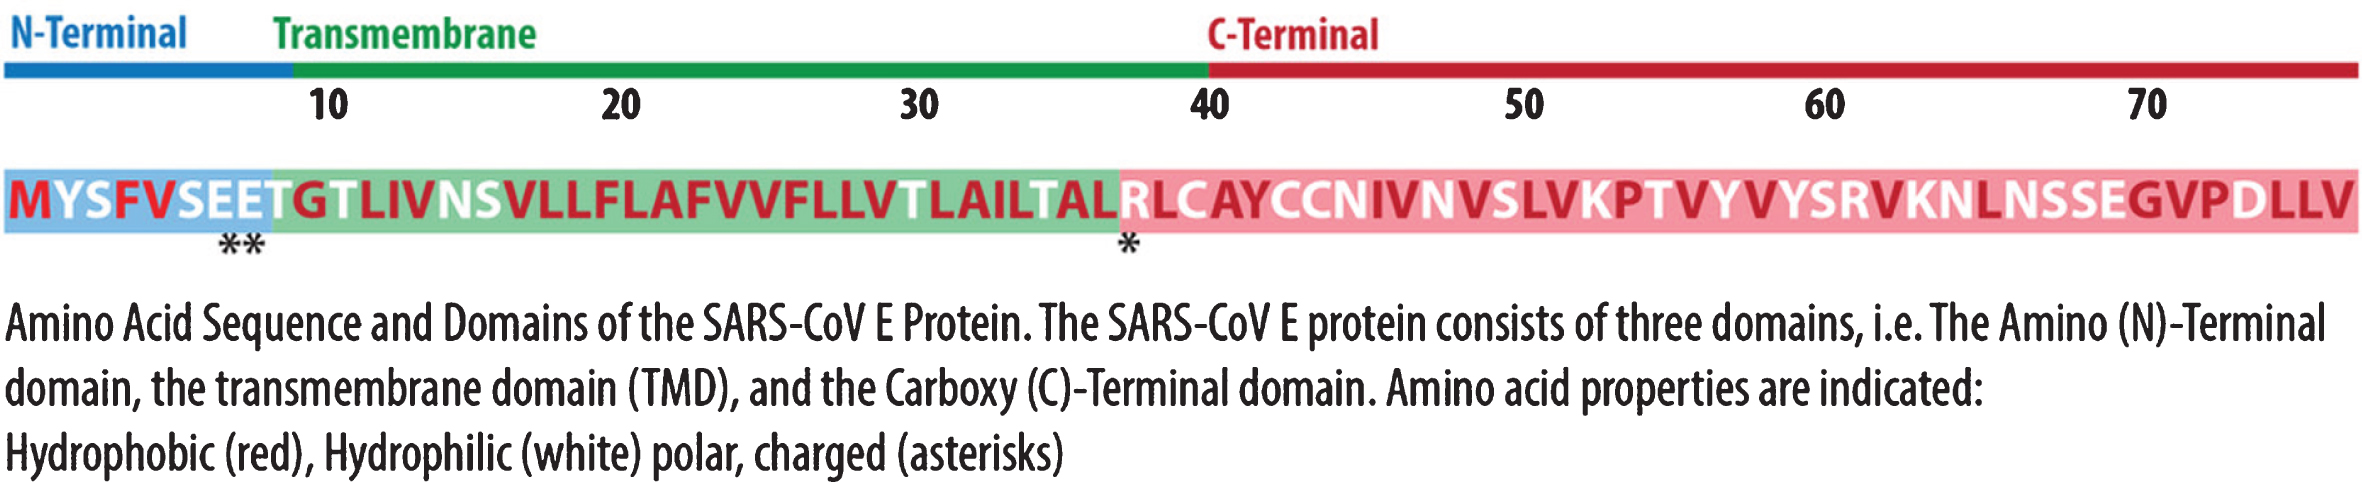 Illustration SARS-CoV Protein E. Adapted from [15]. Illustrated by Dr. Joe Bolanos.